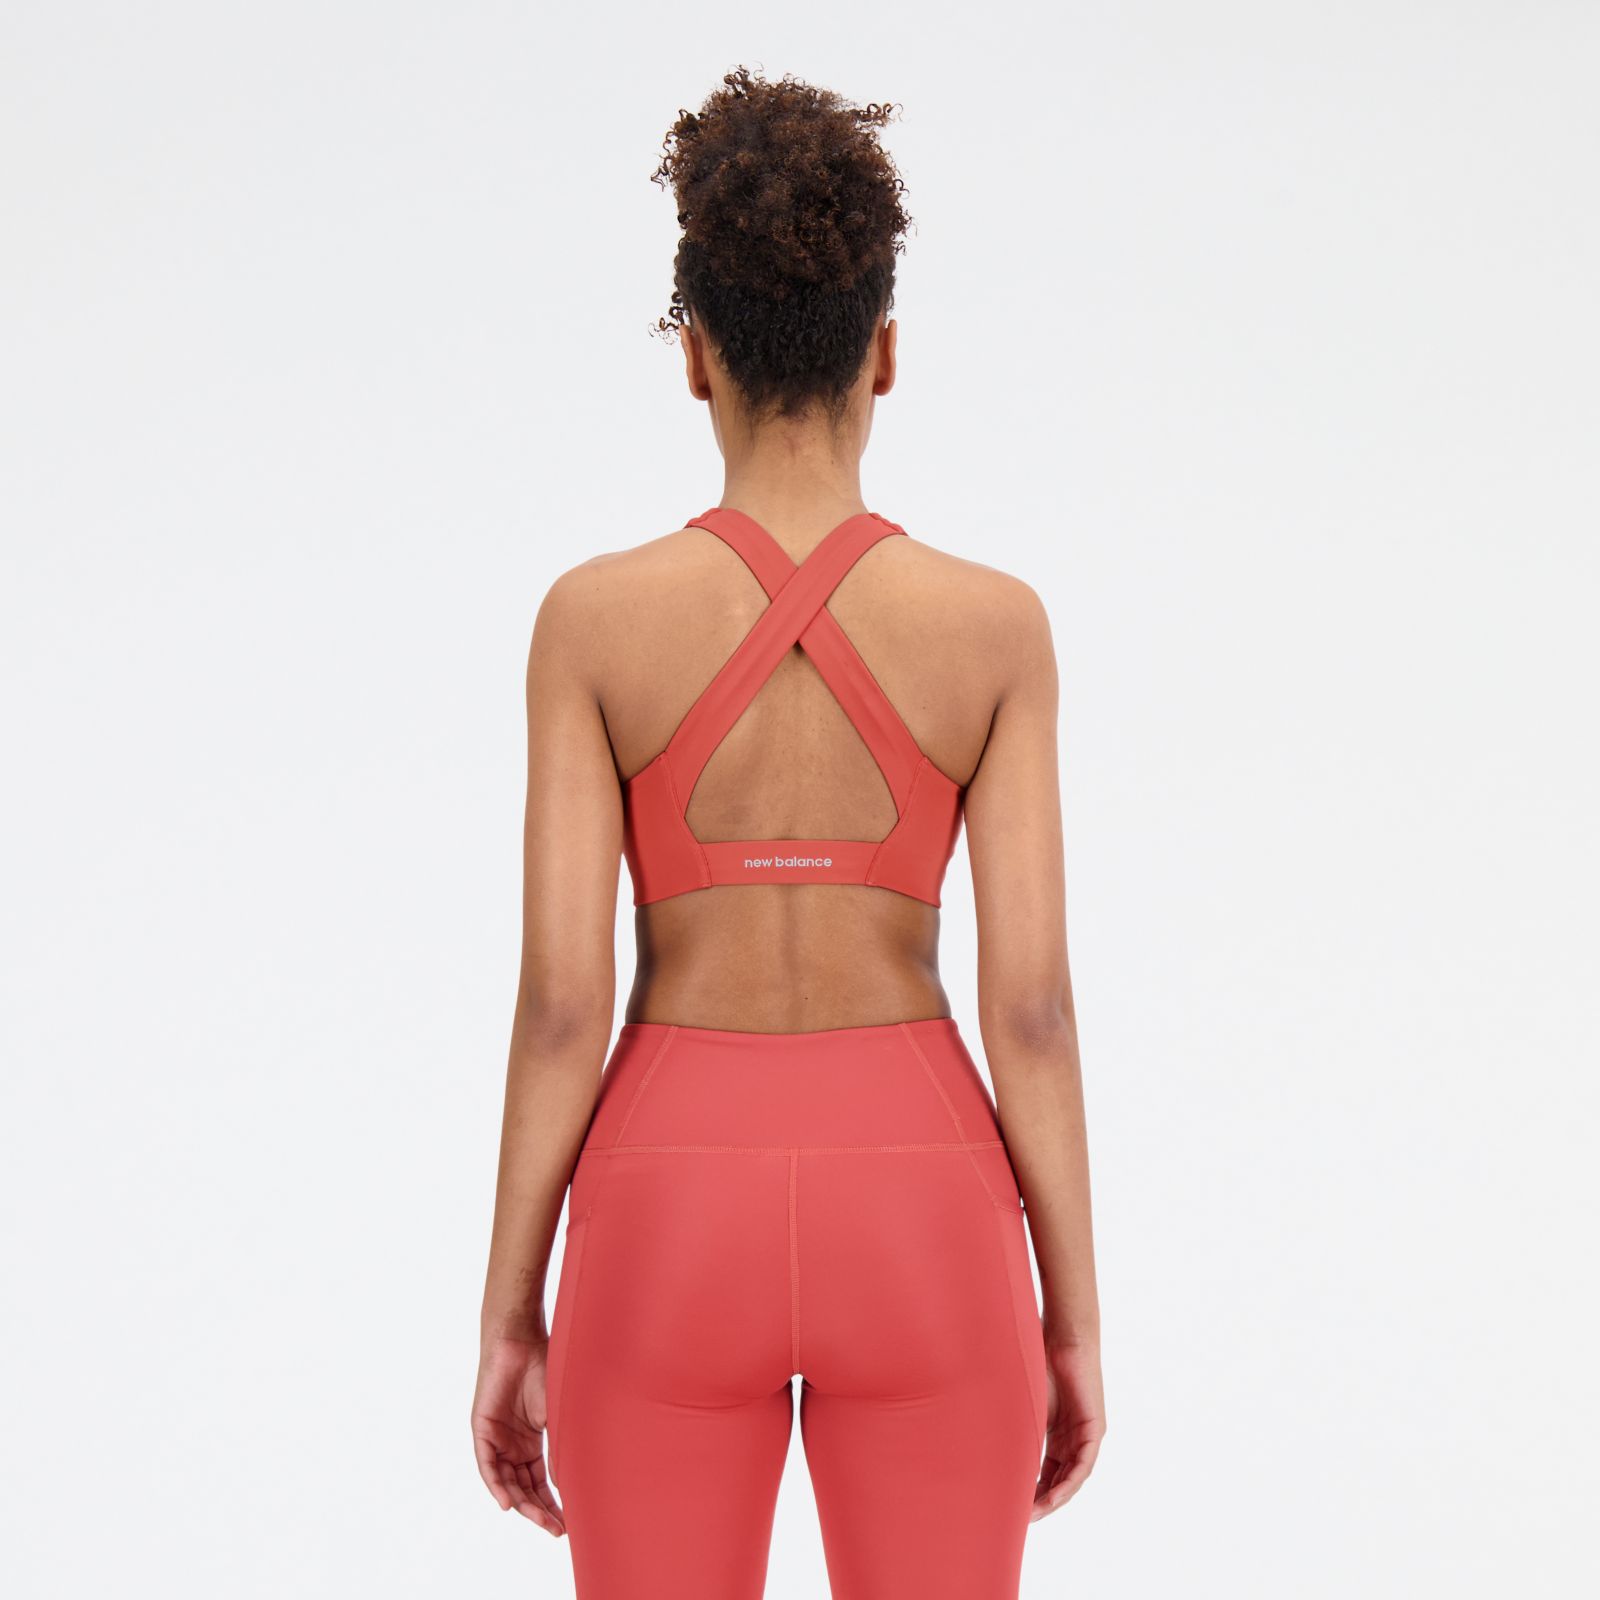 New Balance Nb fuel bra in red